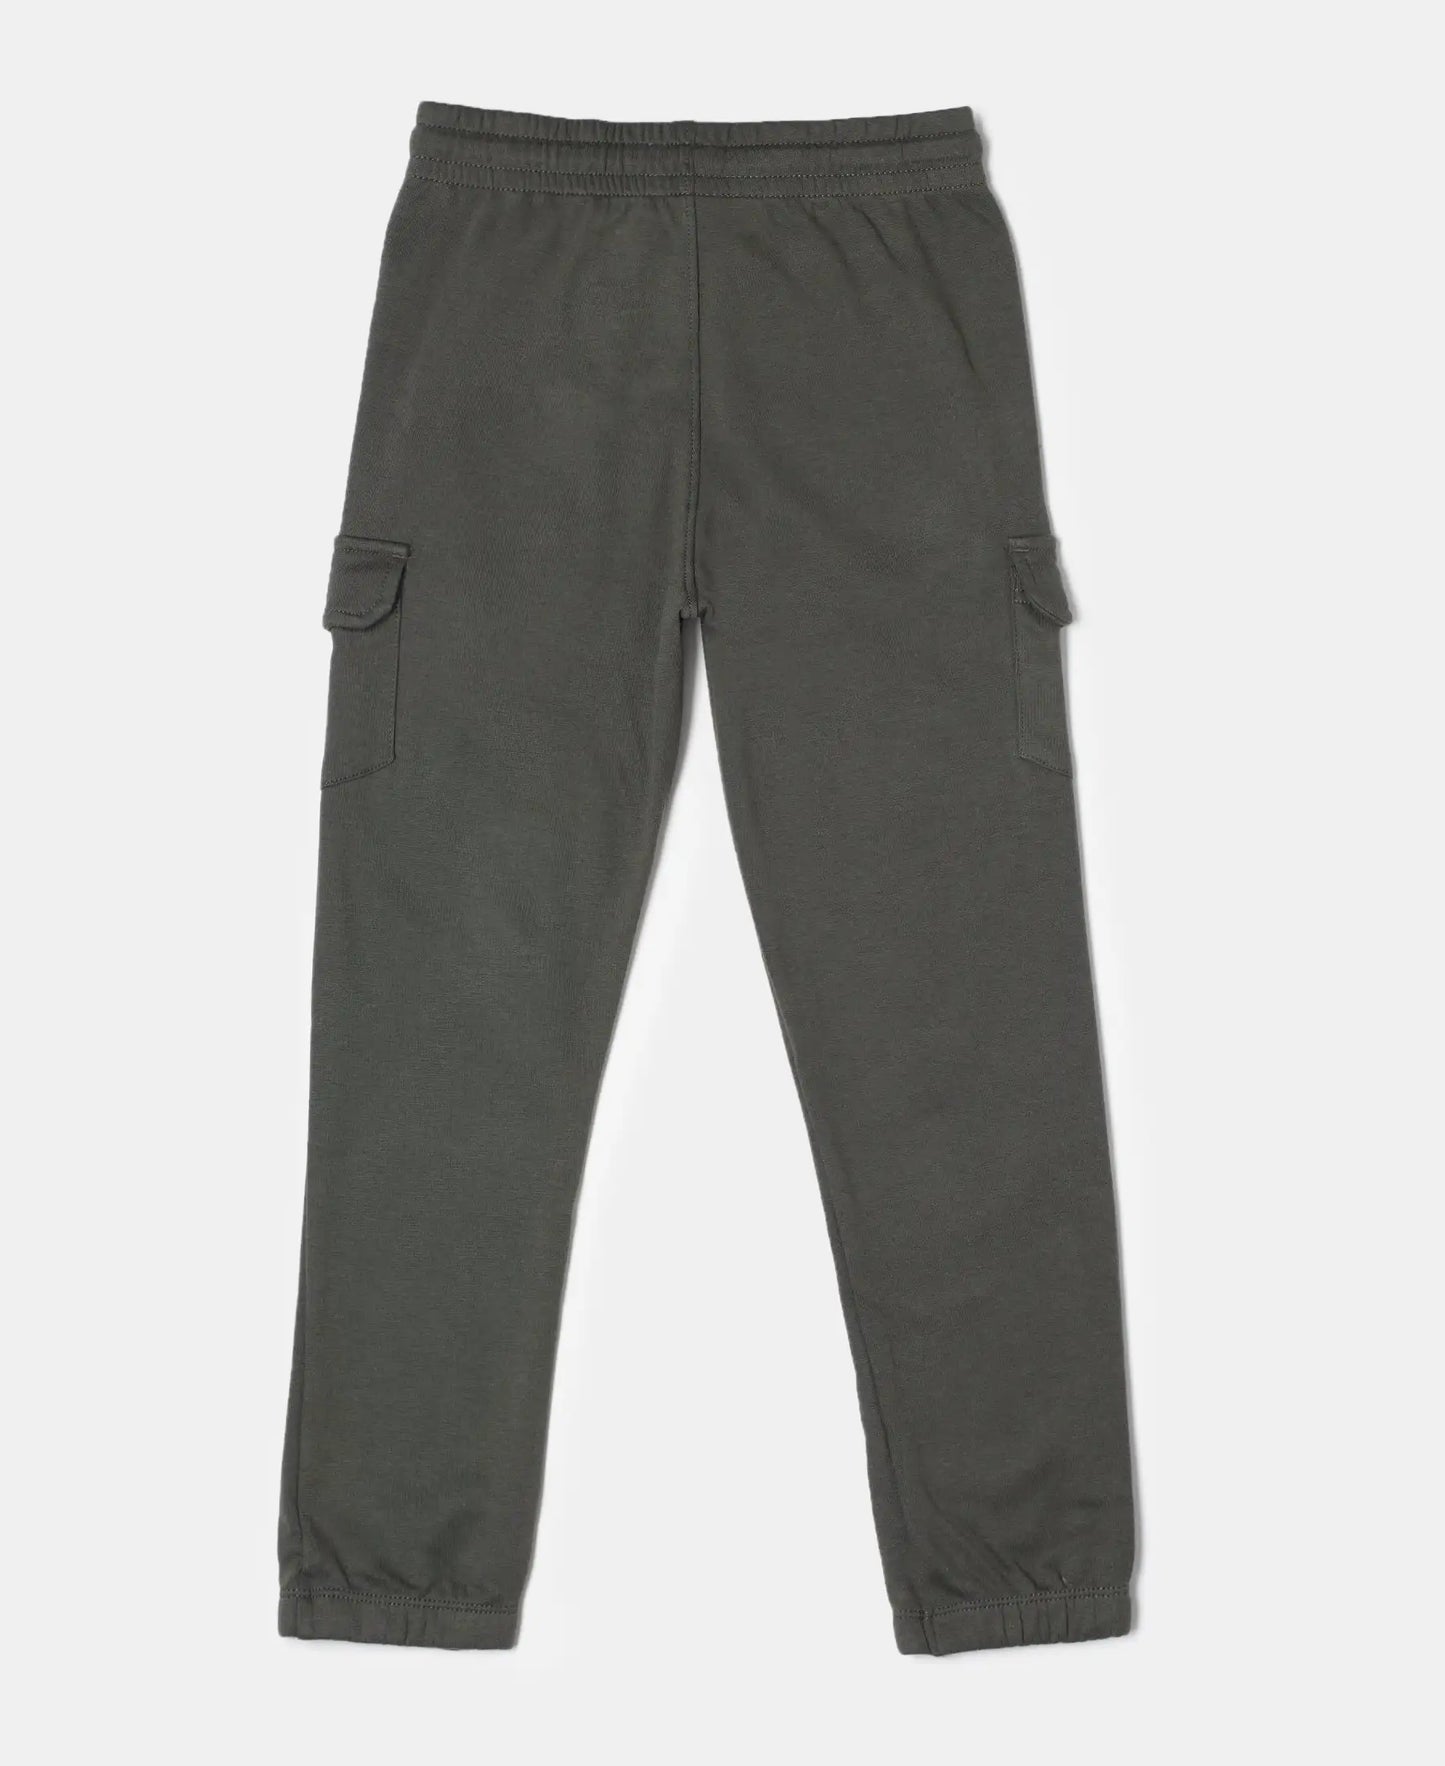 Super Combed Cotton Rich Cargo Pants with Cuffed Hem - Deep Olive-2